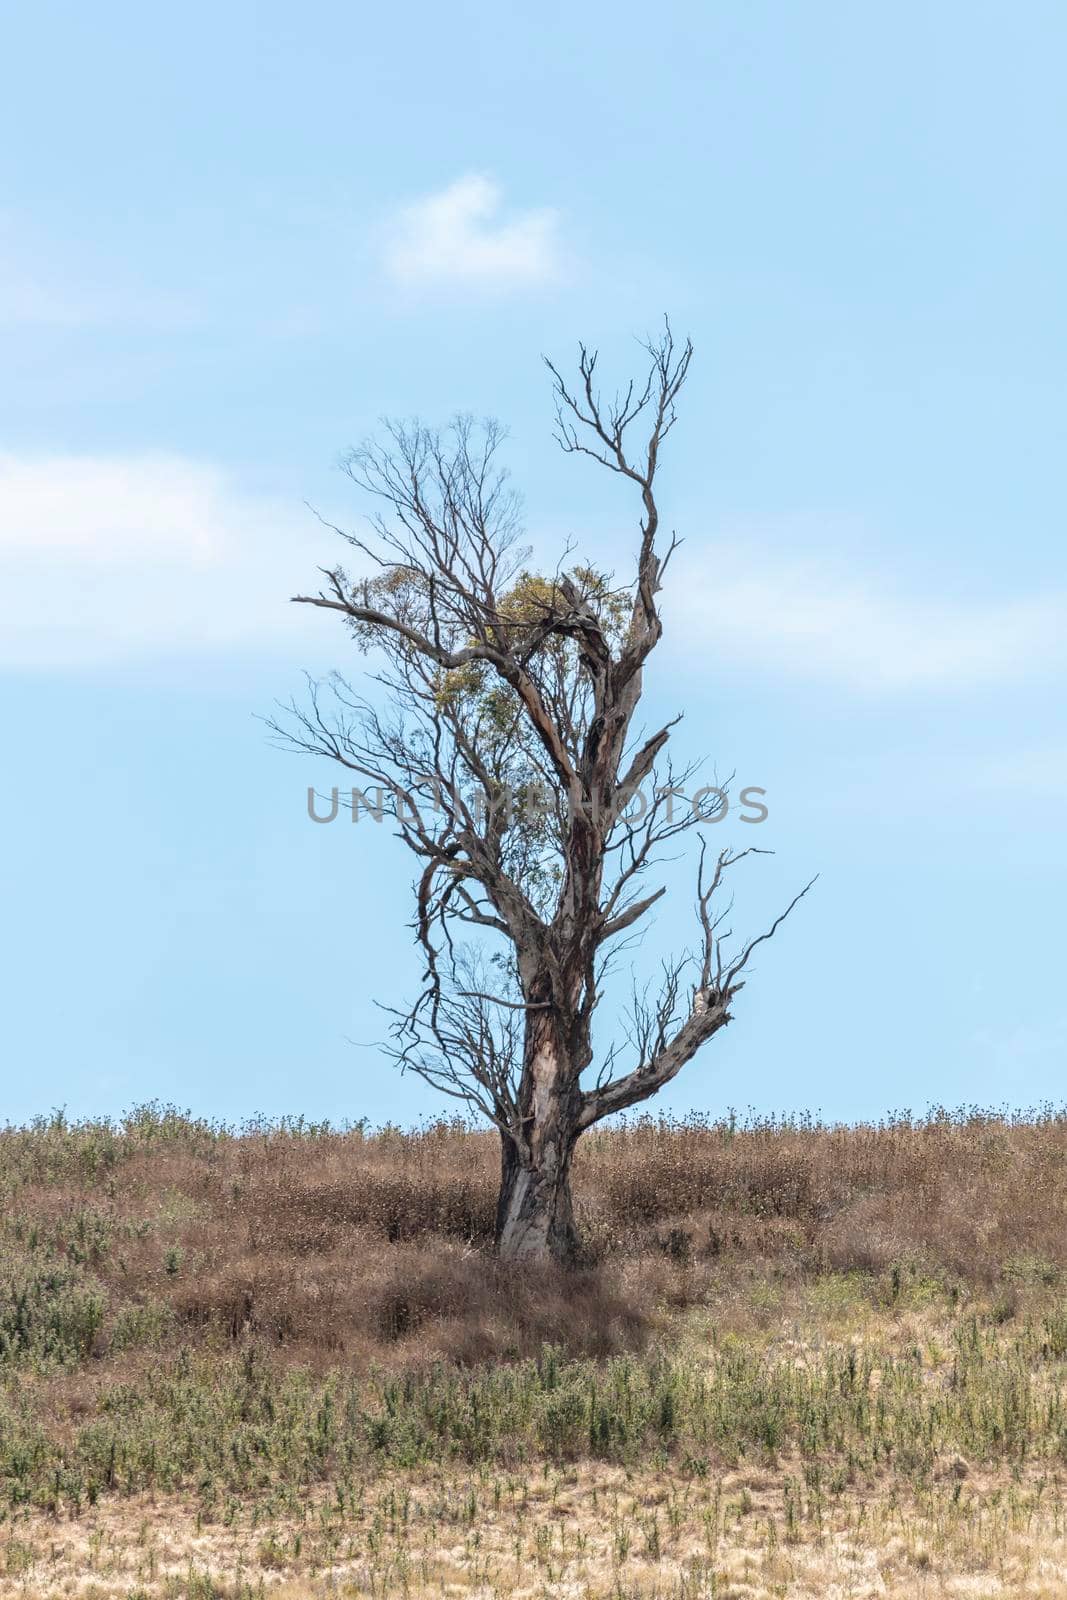 A large gum tree standing on a dry hill near a fence line